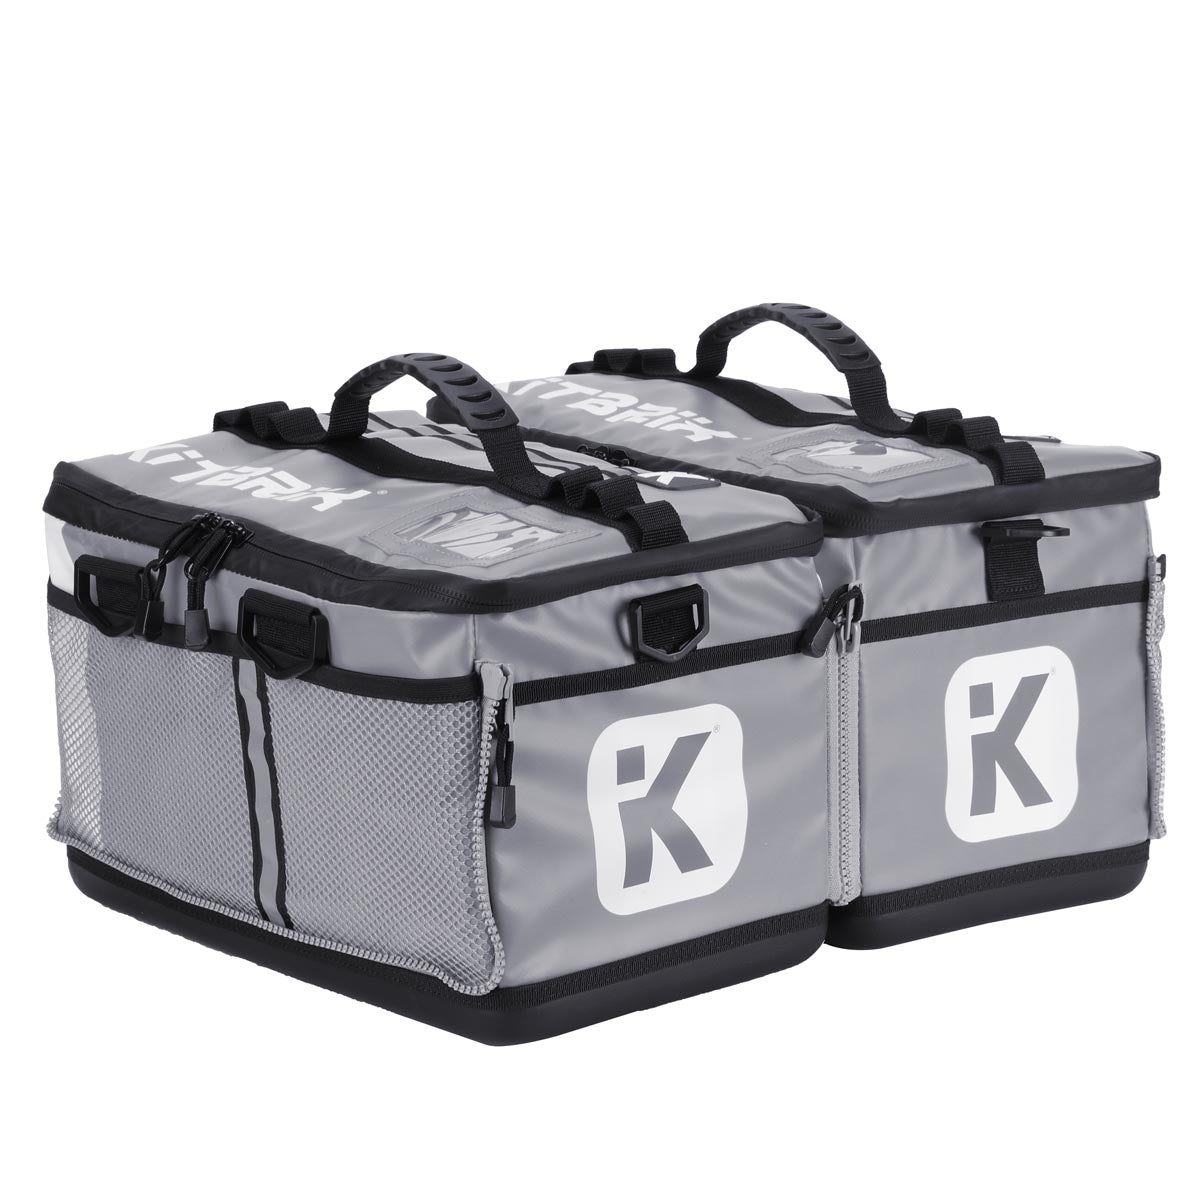 Double Cycle kit bag side